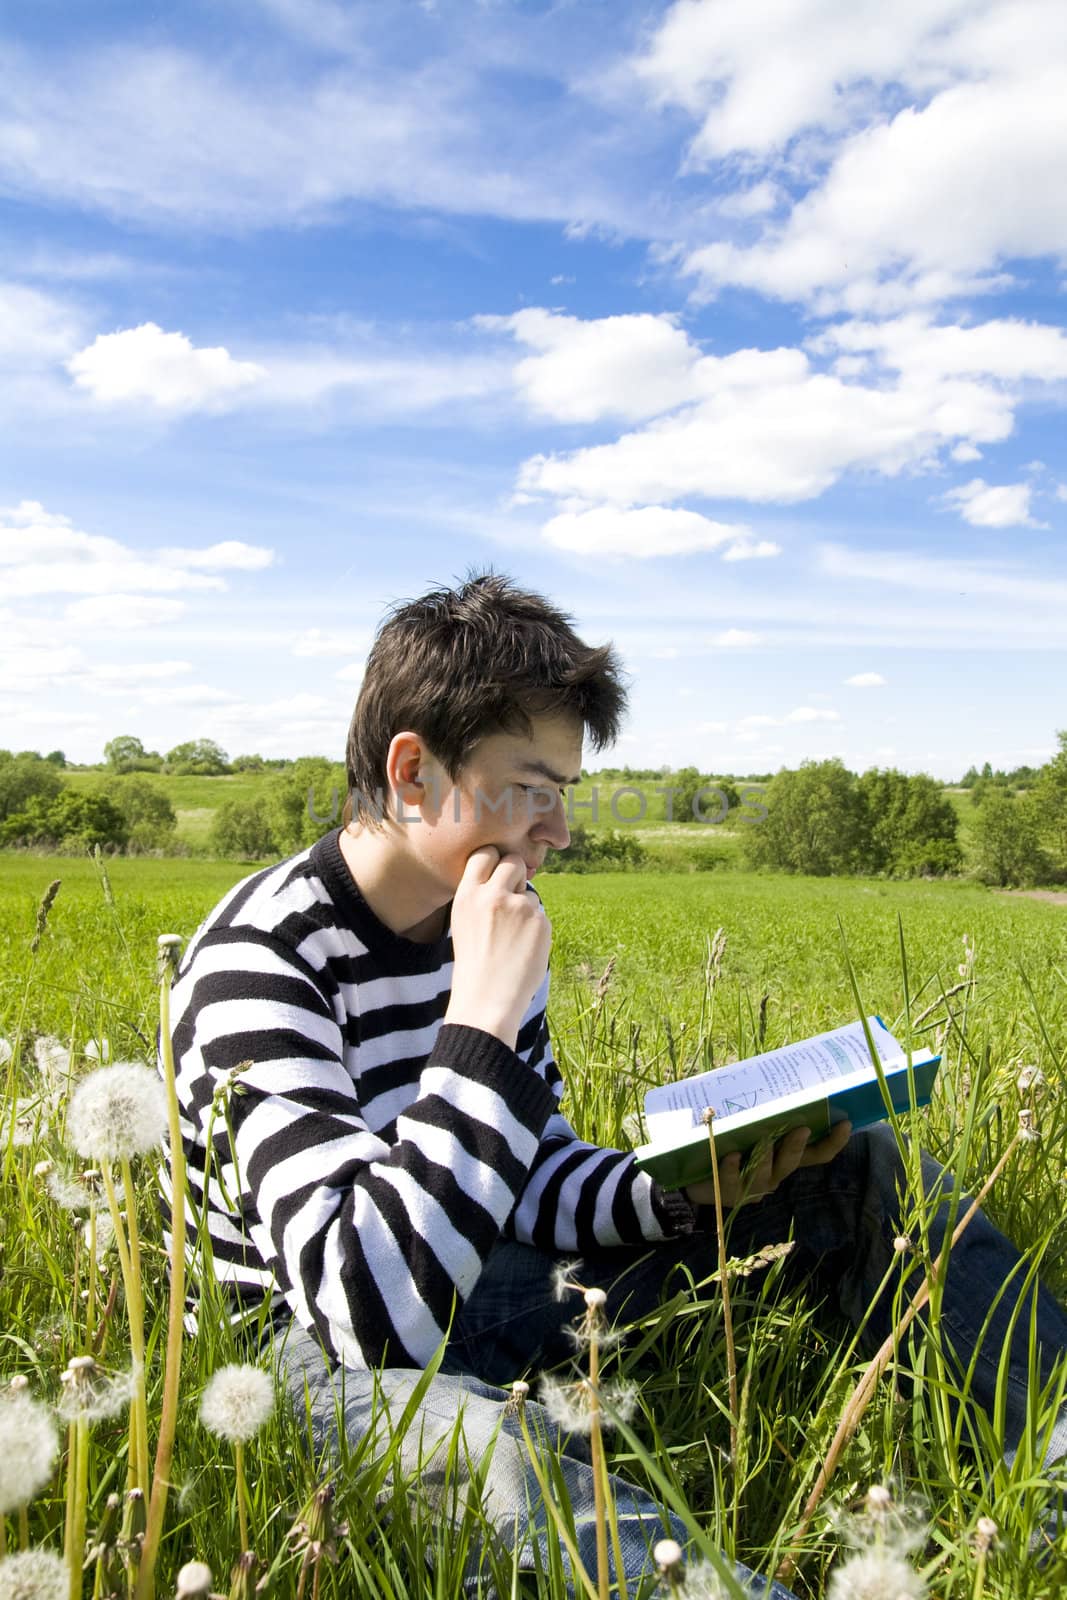 Boy reading a book on the grass. Time before examination